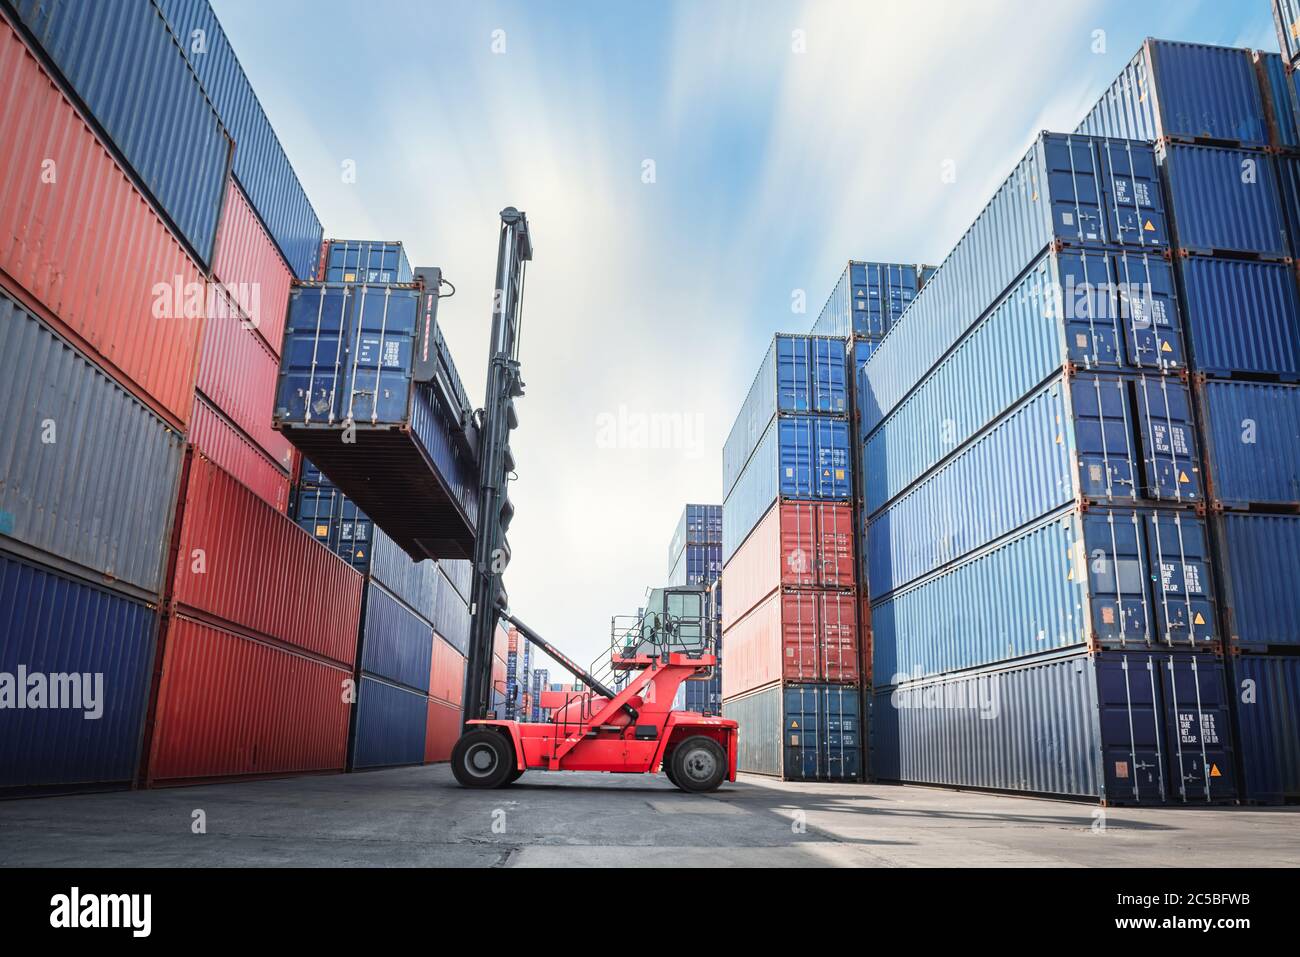 Container Ship Loading of Import/Export Freight Transportation Industry, Transport Crane Forklift is Lifting Box Containers at Port Cargo Shipping Doc Stock Photo